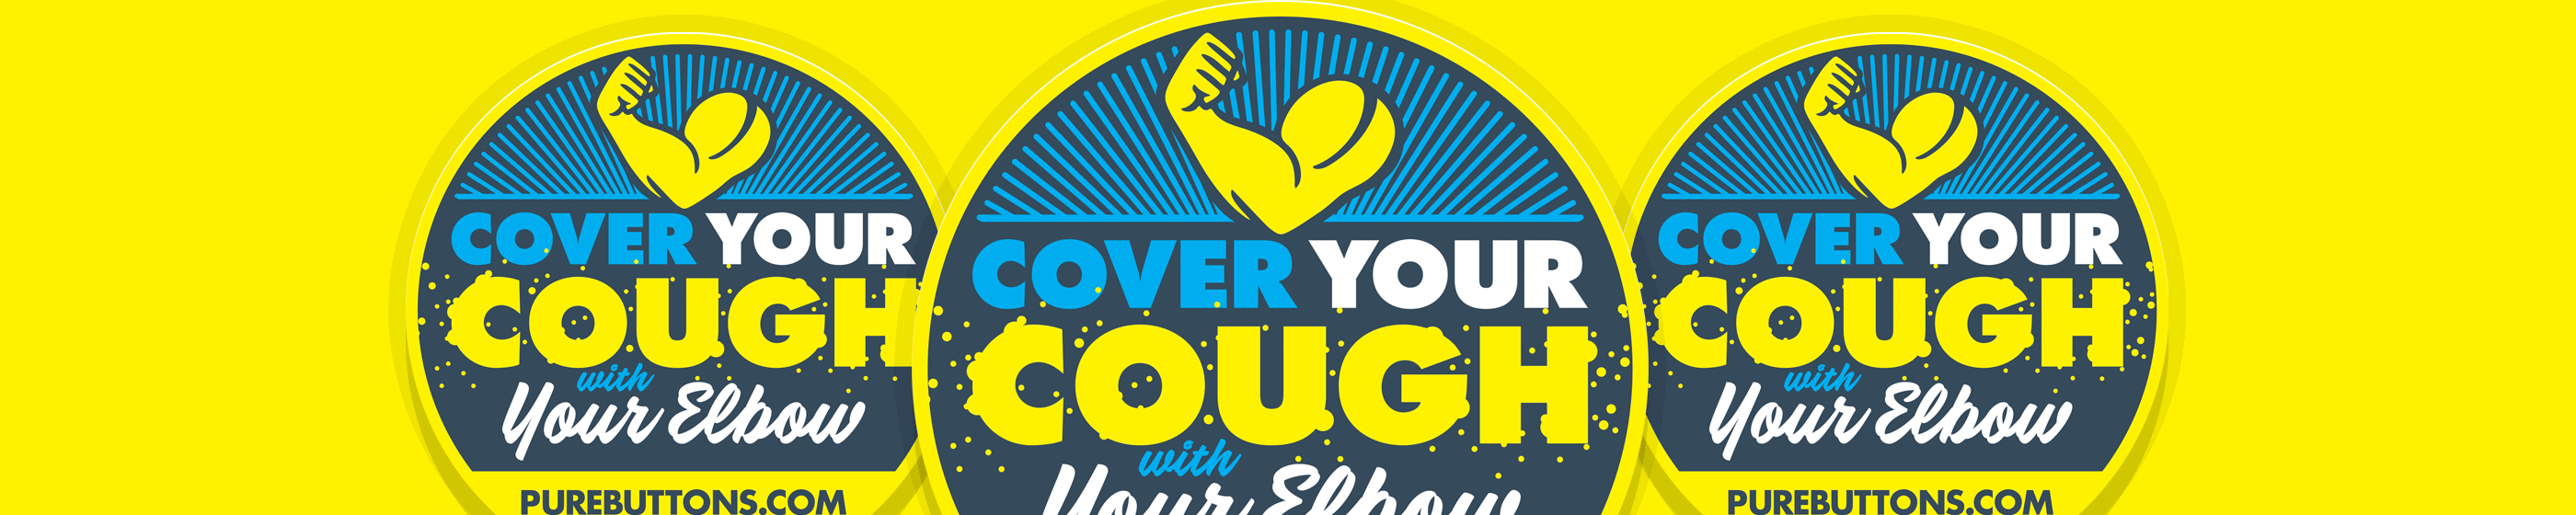 Cover Your Cough Button Box Cover Image